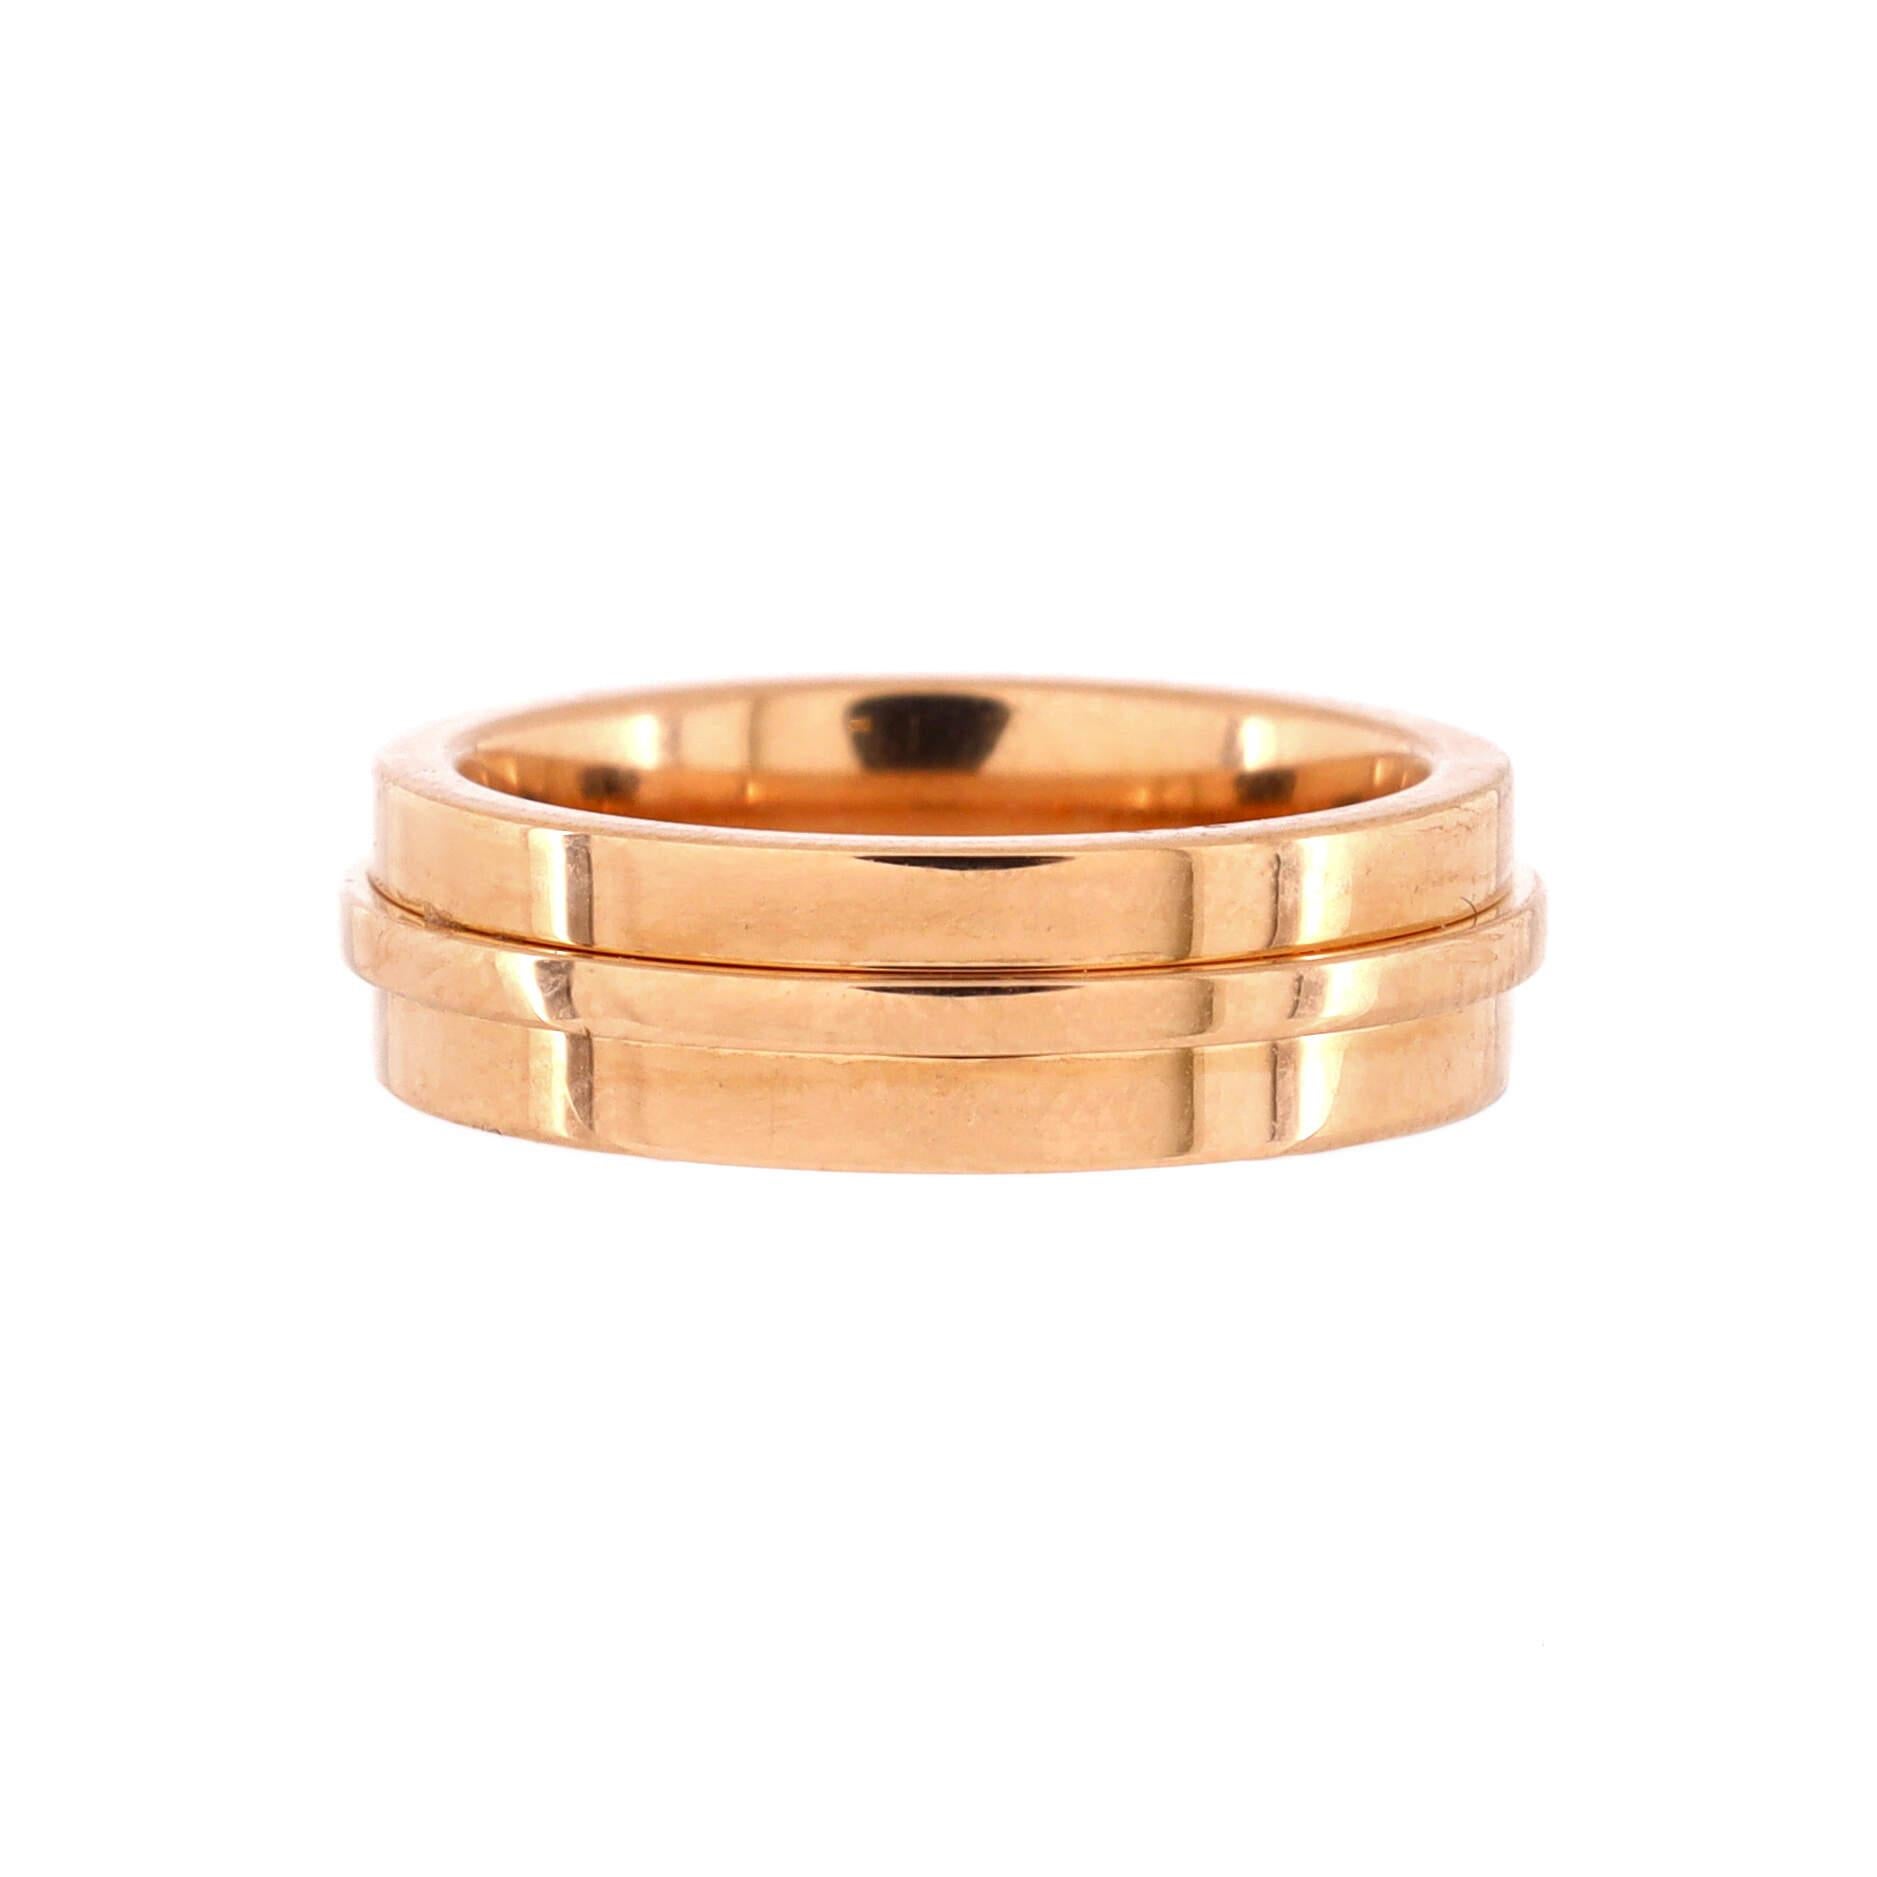 Condition: Great. Minor wear throughout.
Accessories: No Accessories
Measurements: Size: 5.5, Width: 5.65 mm
Designer: Tiffany & Co.
Model: T Two Ring 18K Rose Gold Wide
Exterior Color: Rose Gold
Item Number: 195056/360